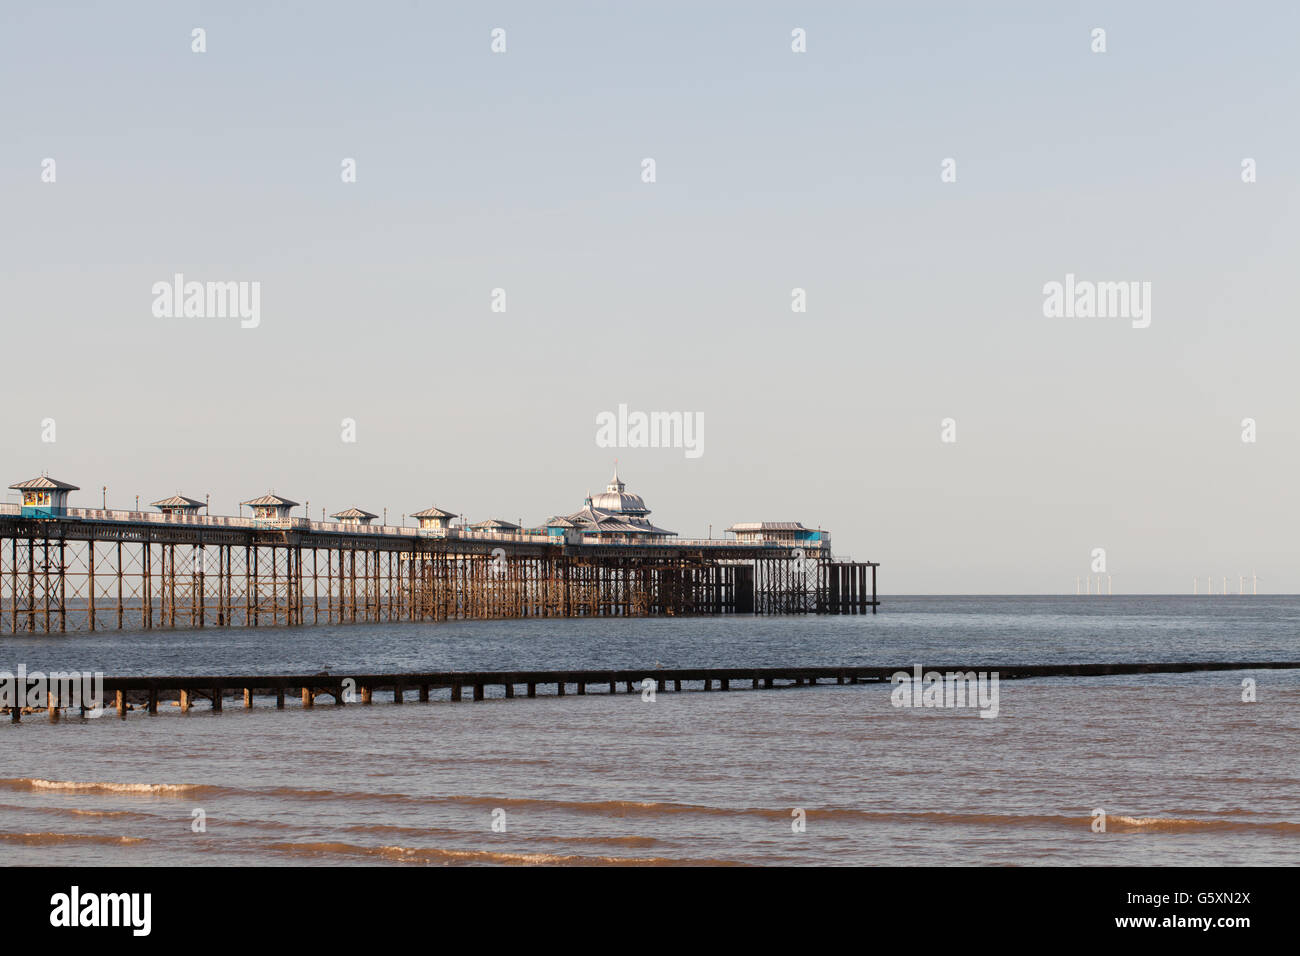 The victorian pier stretching out to sea at Llandudno taken in evening light. Stock Photo